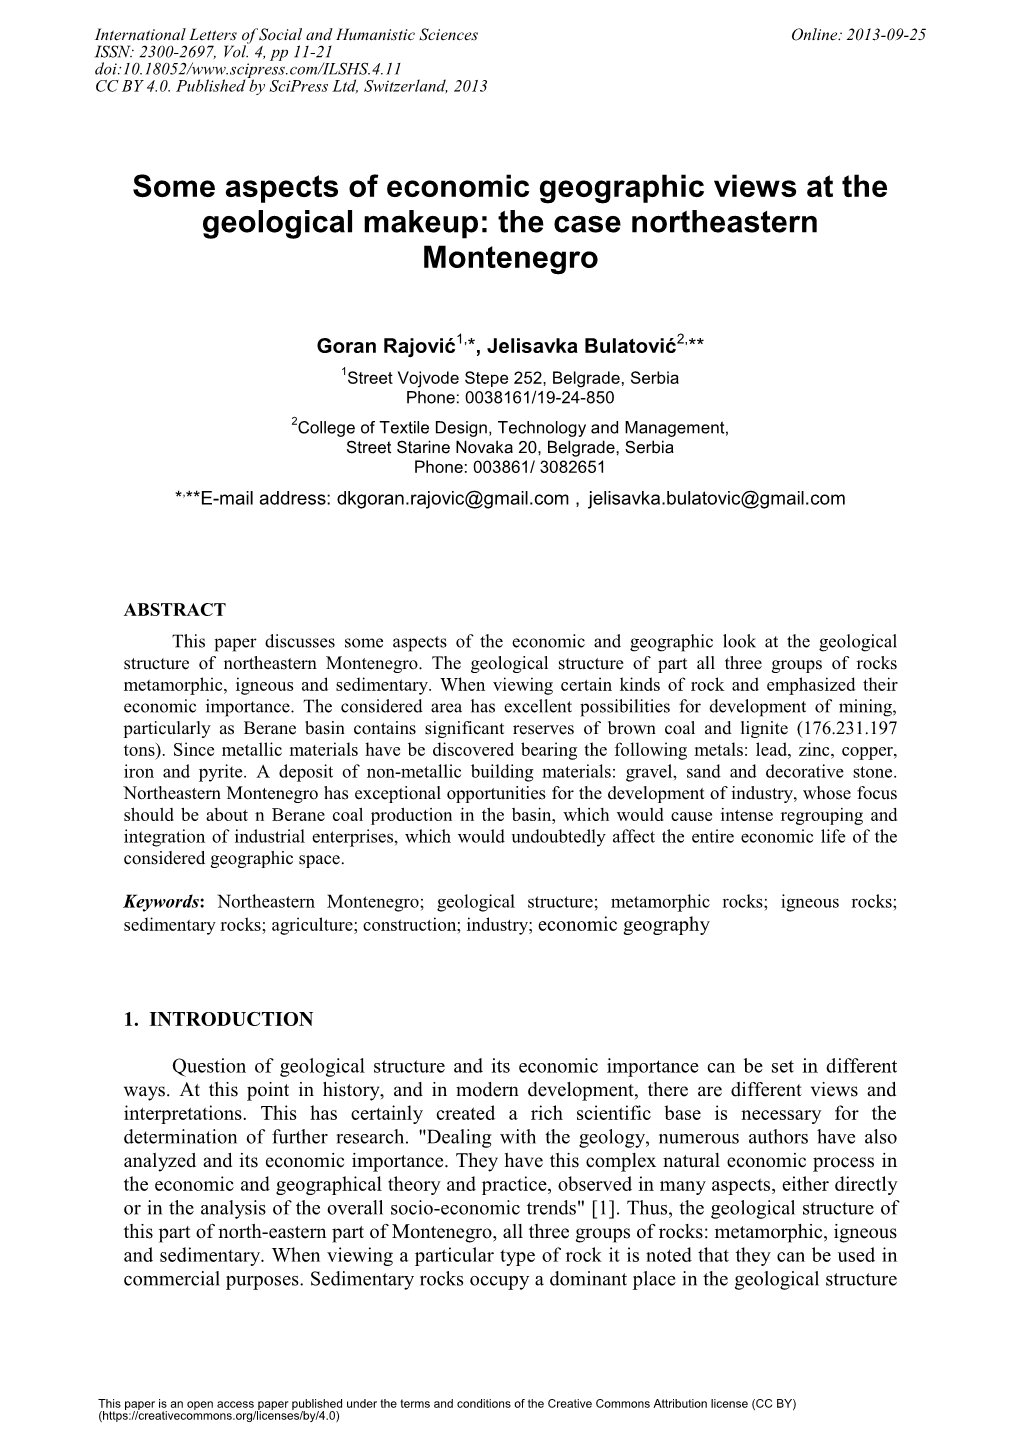 Some Aspects of Economic Geographic Views at the Geological Makeup: the Case Northeastern Montenegro